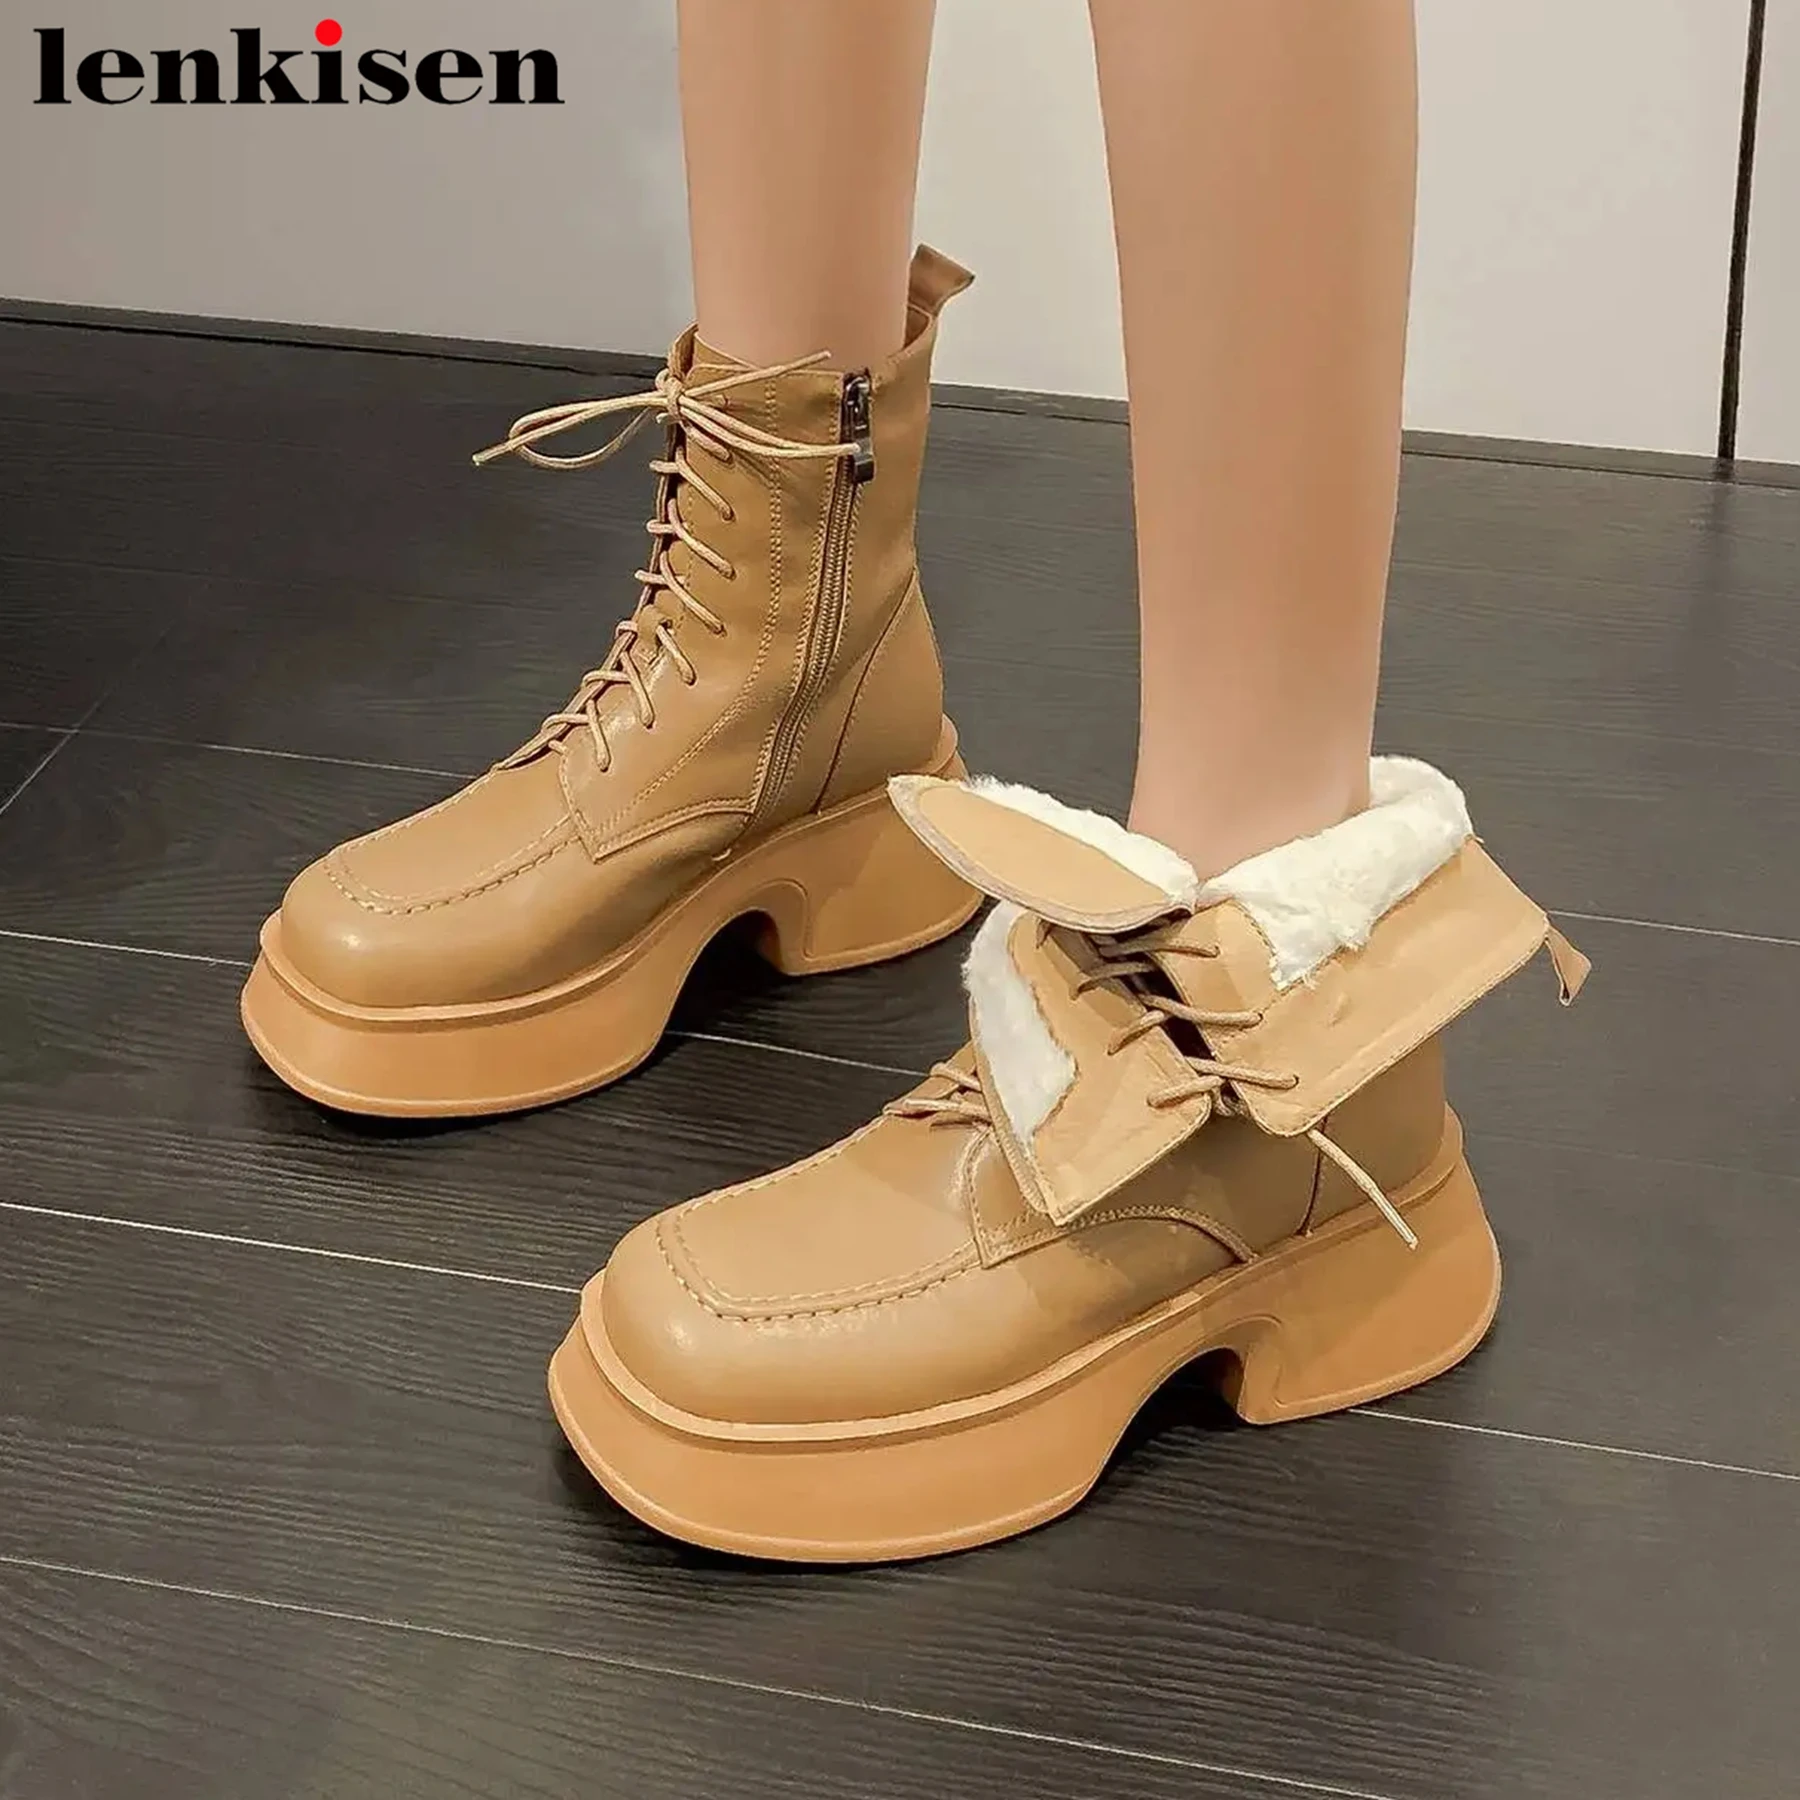 

Lenkisen Keep Warm Wool Cow Leather Round Toe Platform Snow Boots Fur Cross-tied Casual Classics Winter Motorcycles Ankle Boots